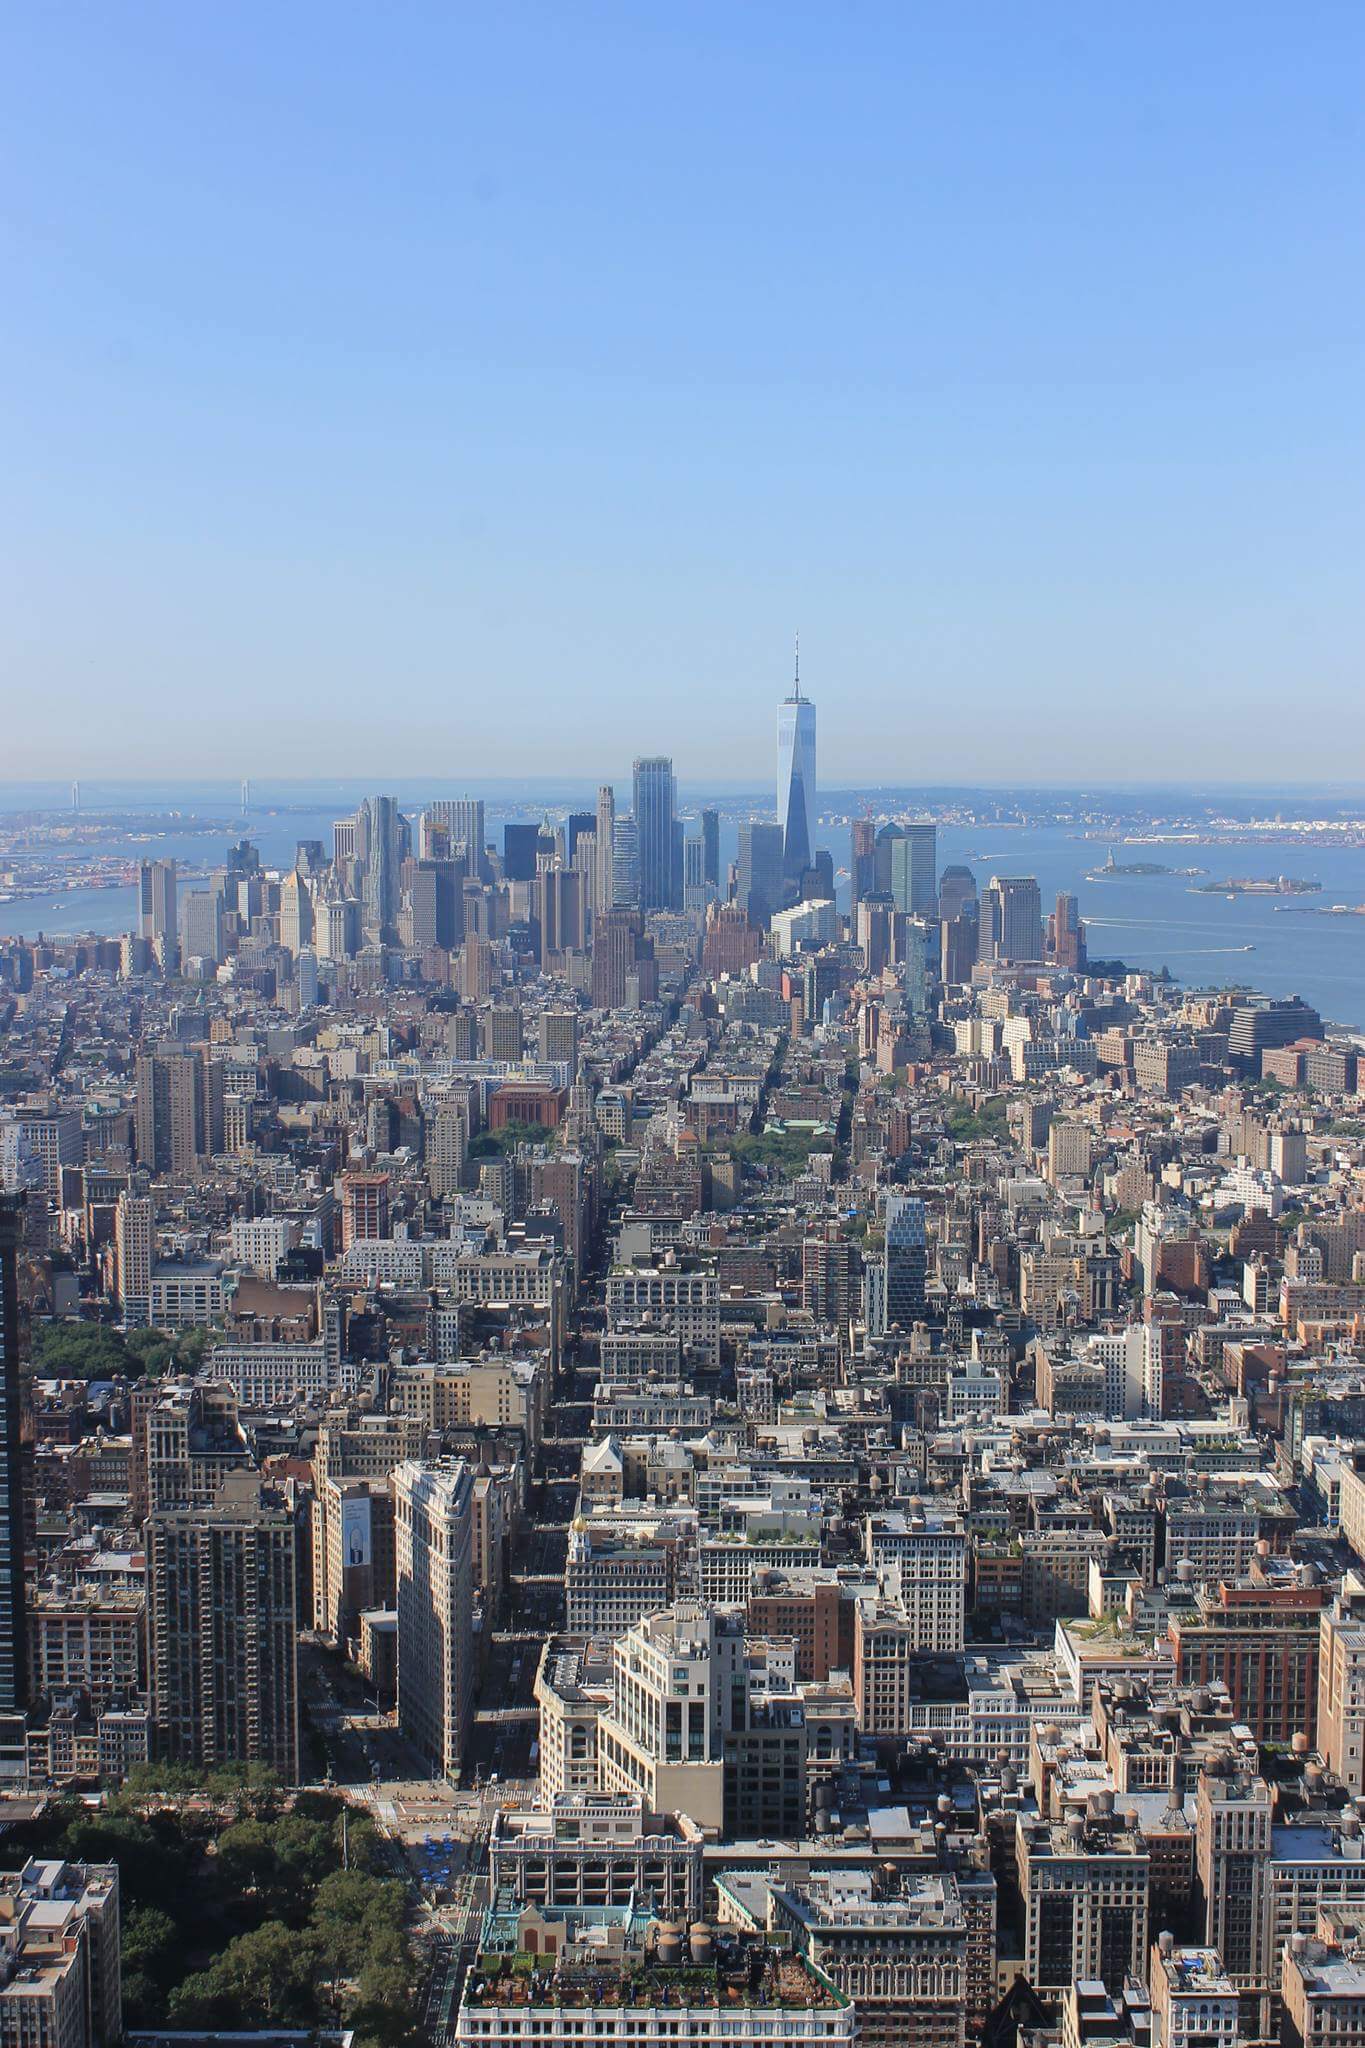 View of Manhattan from the Empire State Building